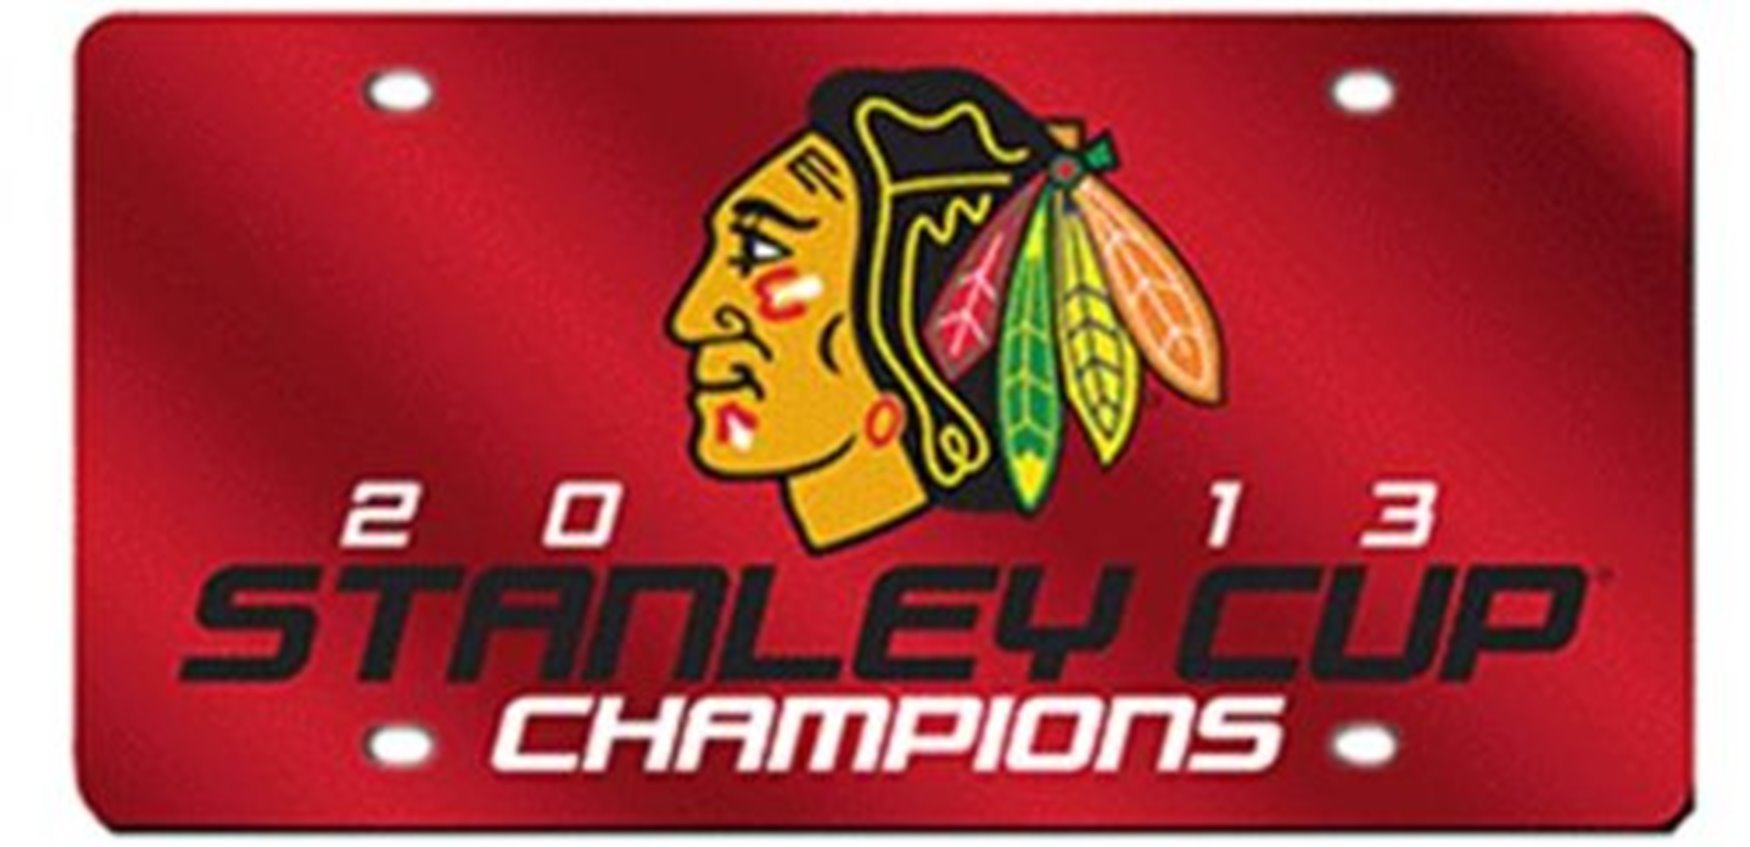 Chicago Blackhawks 2013 Stanley Cup Champions Laser Cut Tag License Plate, Red Mirrored Acrylic Inlaid, 12x6 Inch